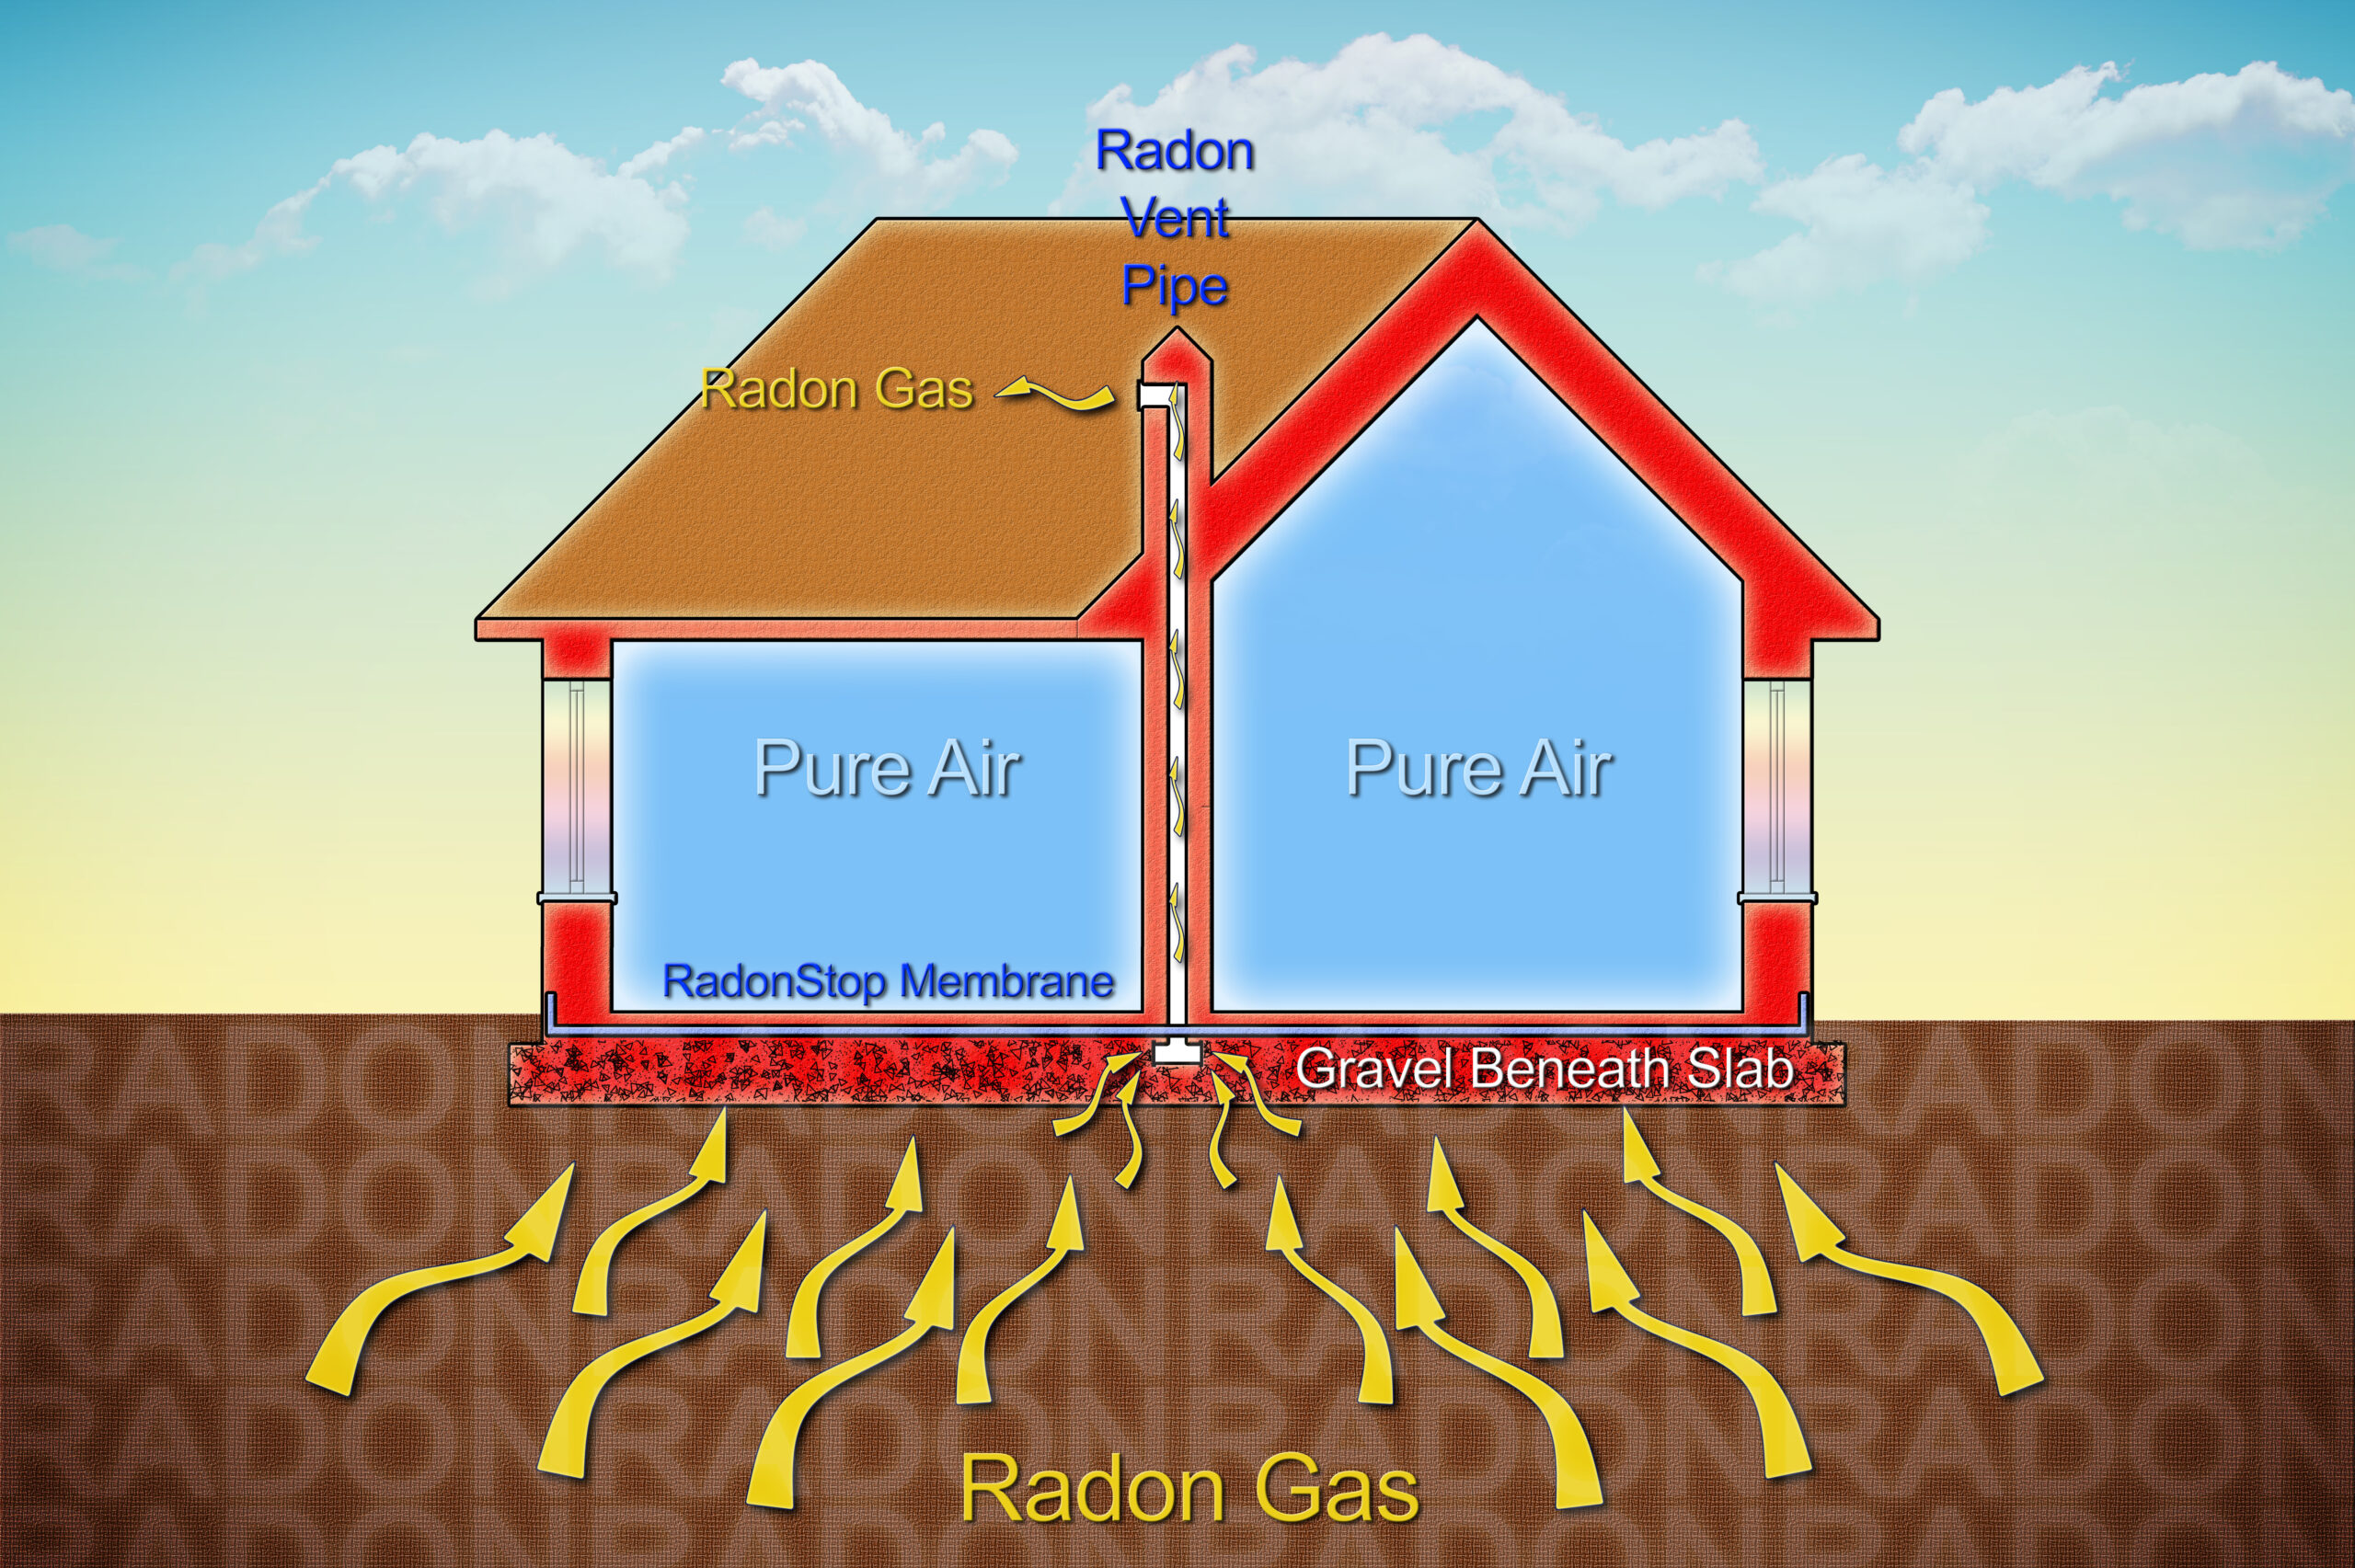 How to protect your home from radon gas thanks to a polyethylene membrane barrier and areated crawl space - concept illustration with a cross section of a building